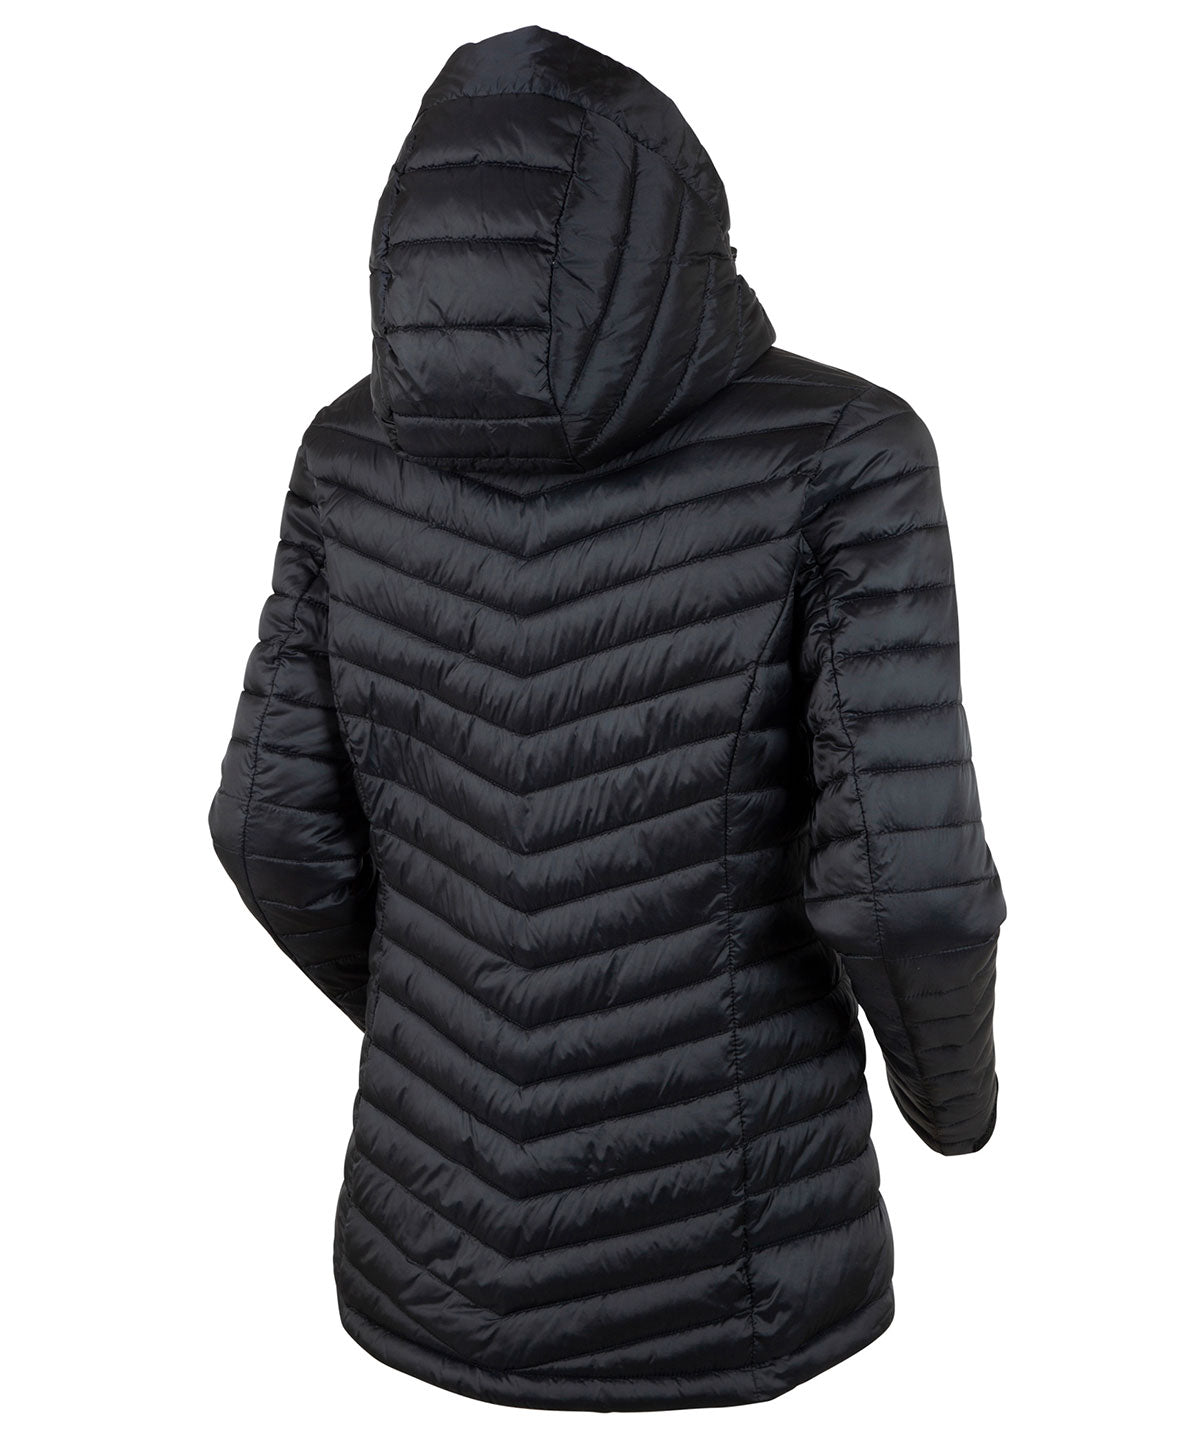 Women's Jojo Thermal Quilted Long Jacket with Hood - Sunice